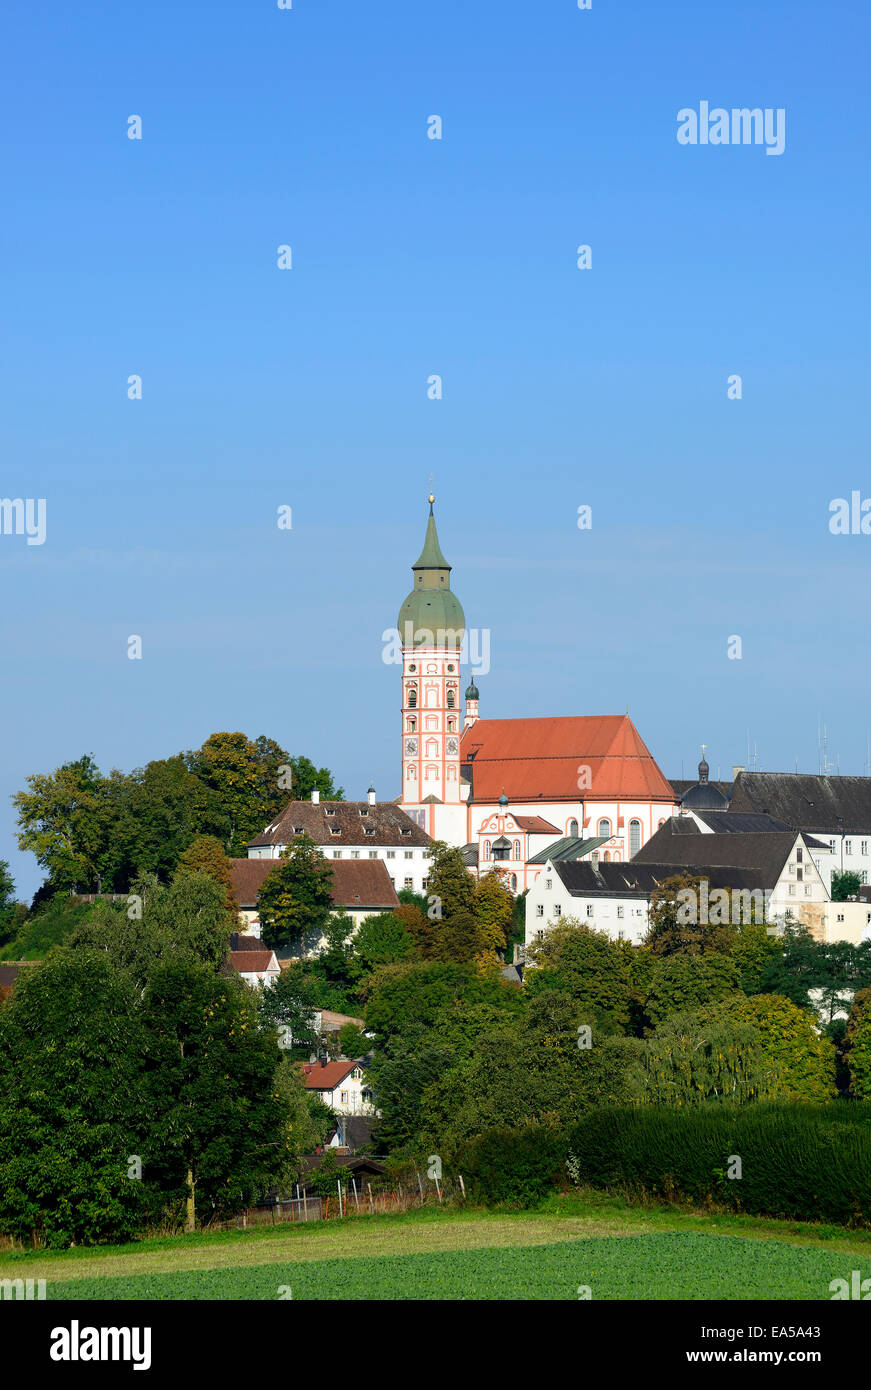 Germany, Bavaria, Upper Bavaria, View of Andechs Abbey Stock Photo